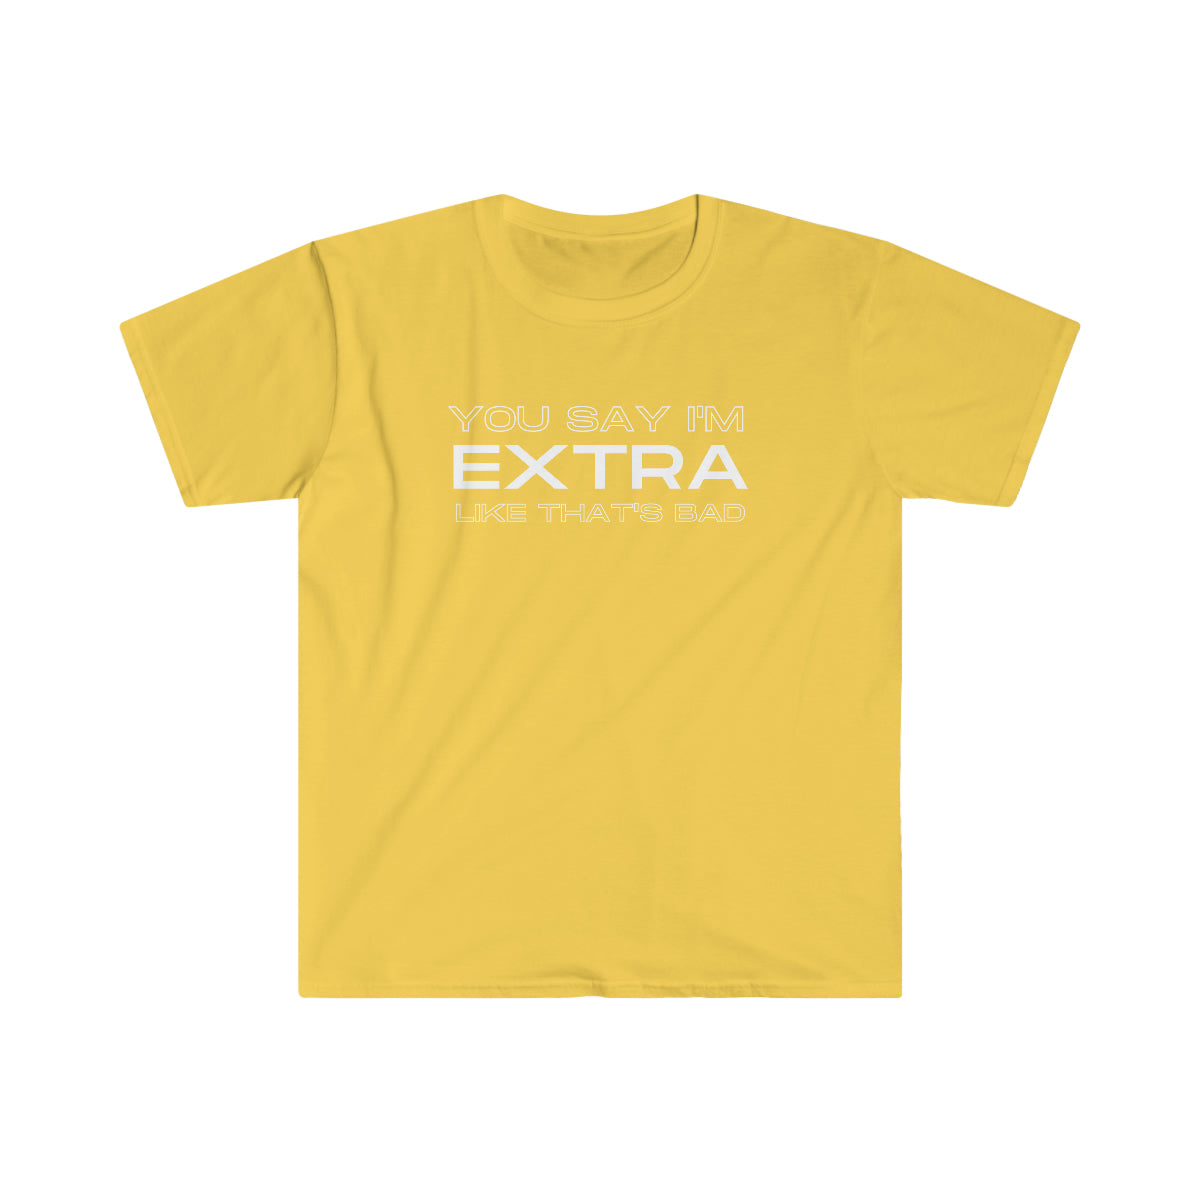 You Say I'm Extra Tee